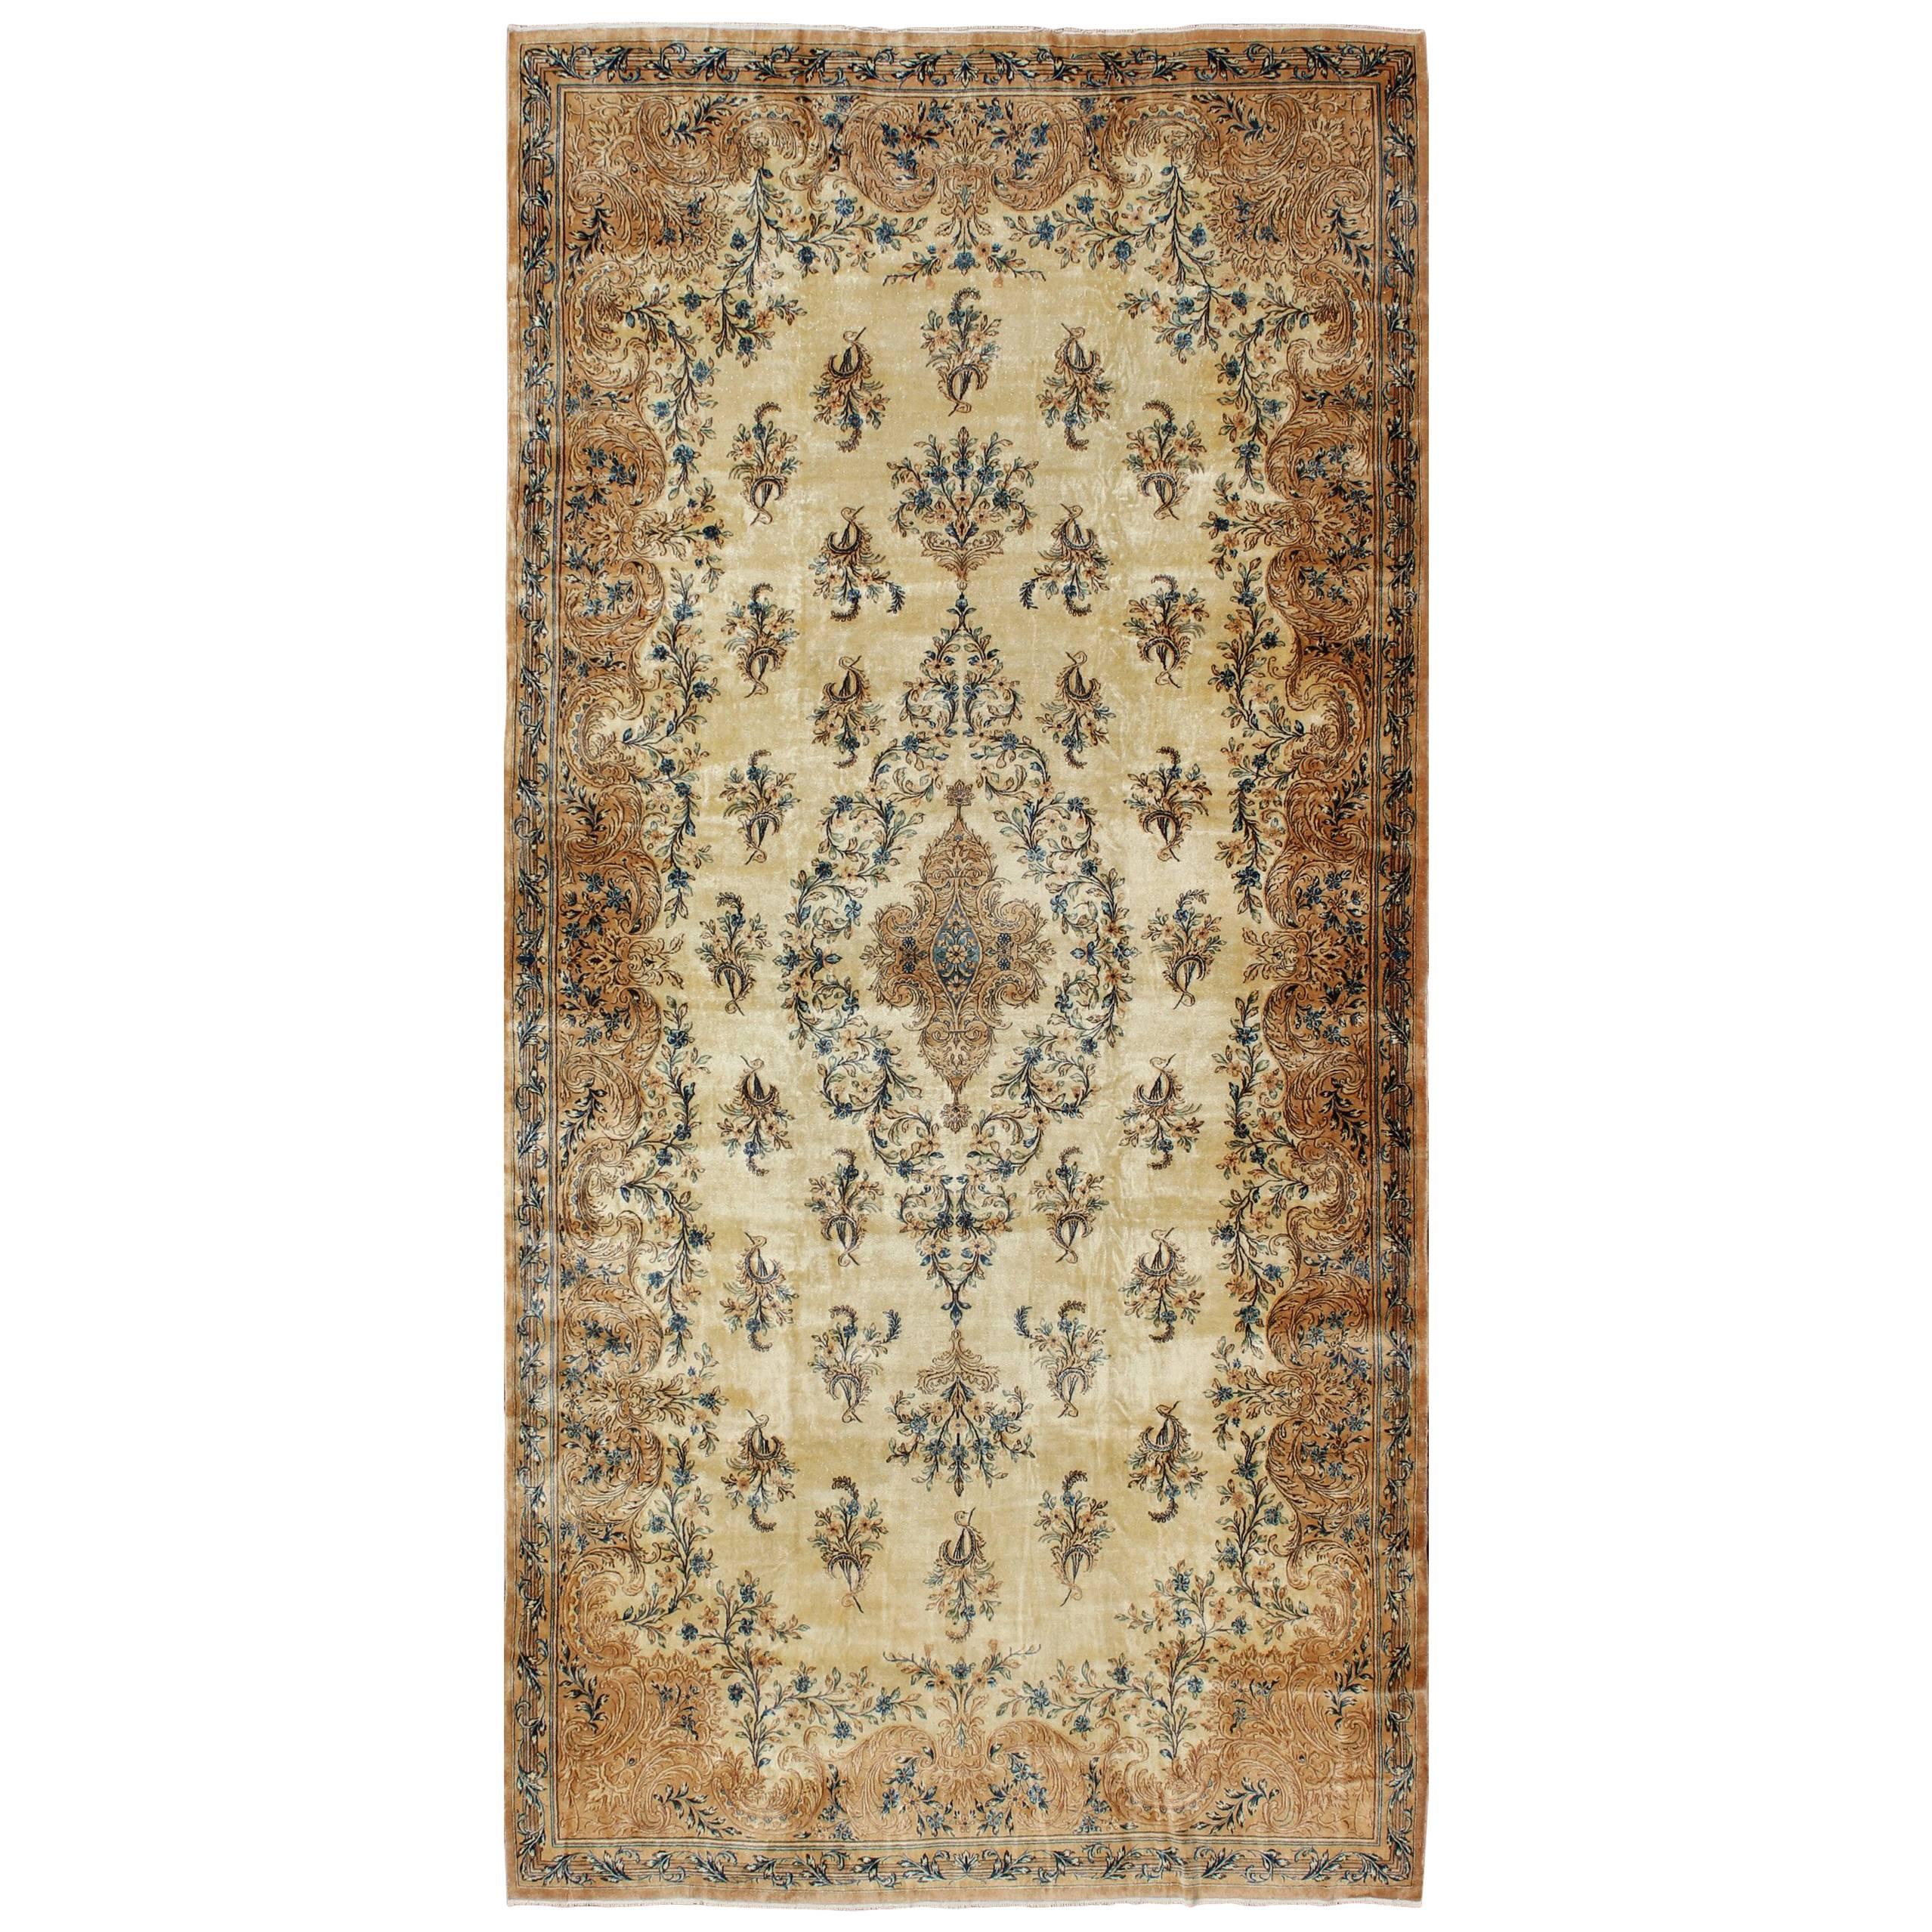 Large Antique Lavar Kerman Rug with Blossoming Floral Motifs in Cream and Blue